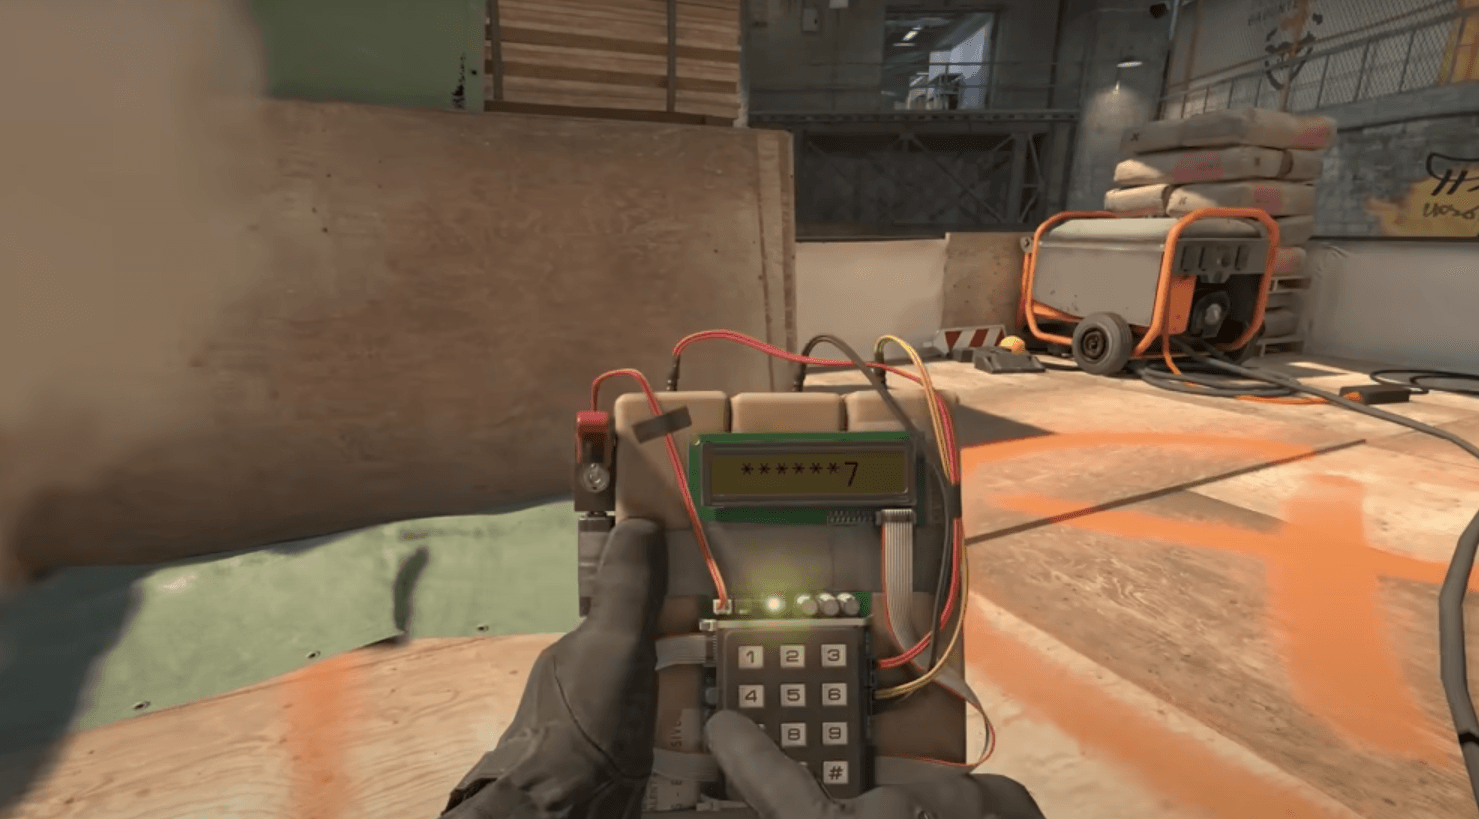 Counter-Strike 2: Release Date, Source 2 Engine, Skins and Everything You  Need To Know